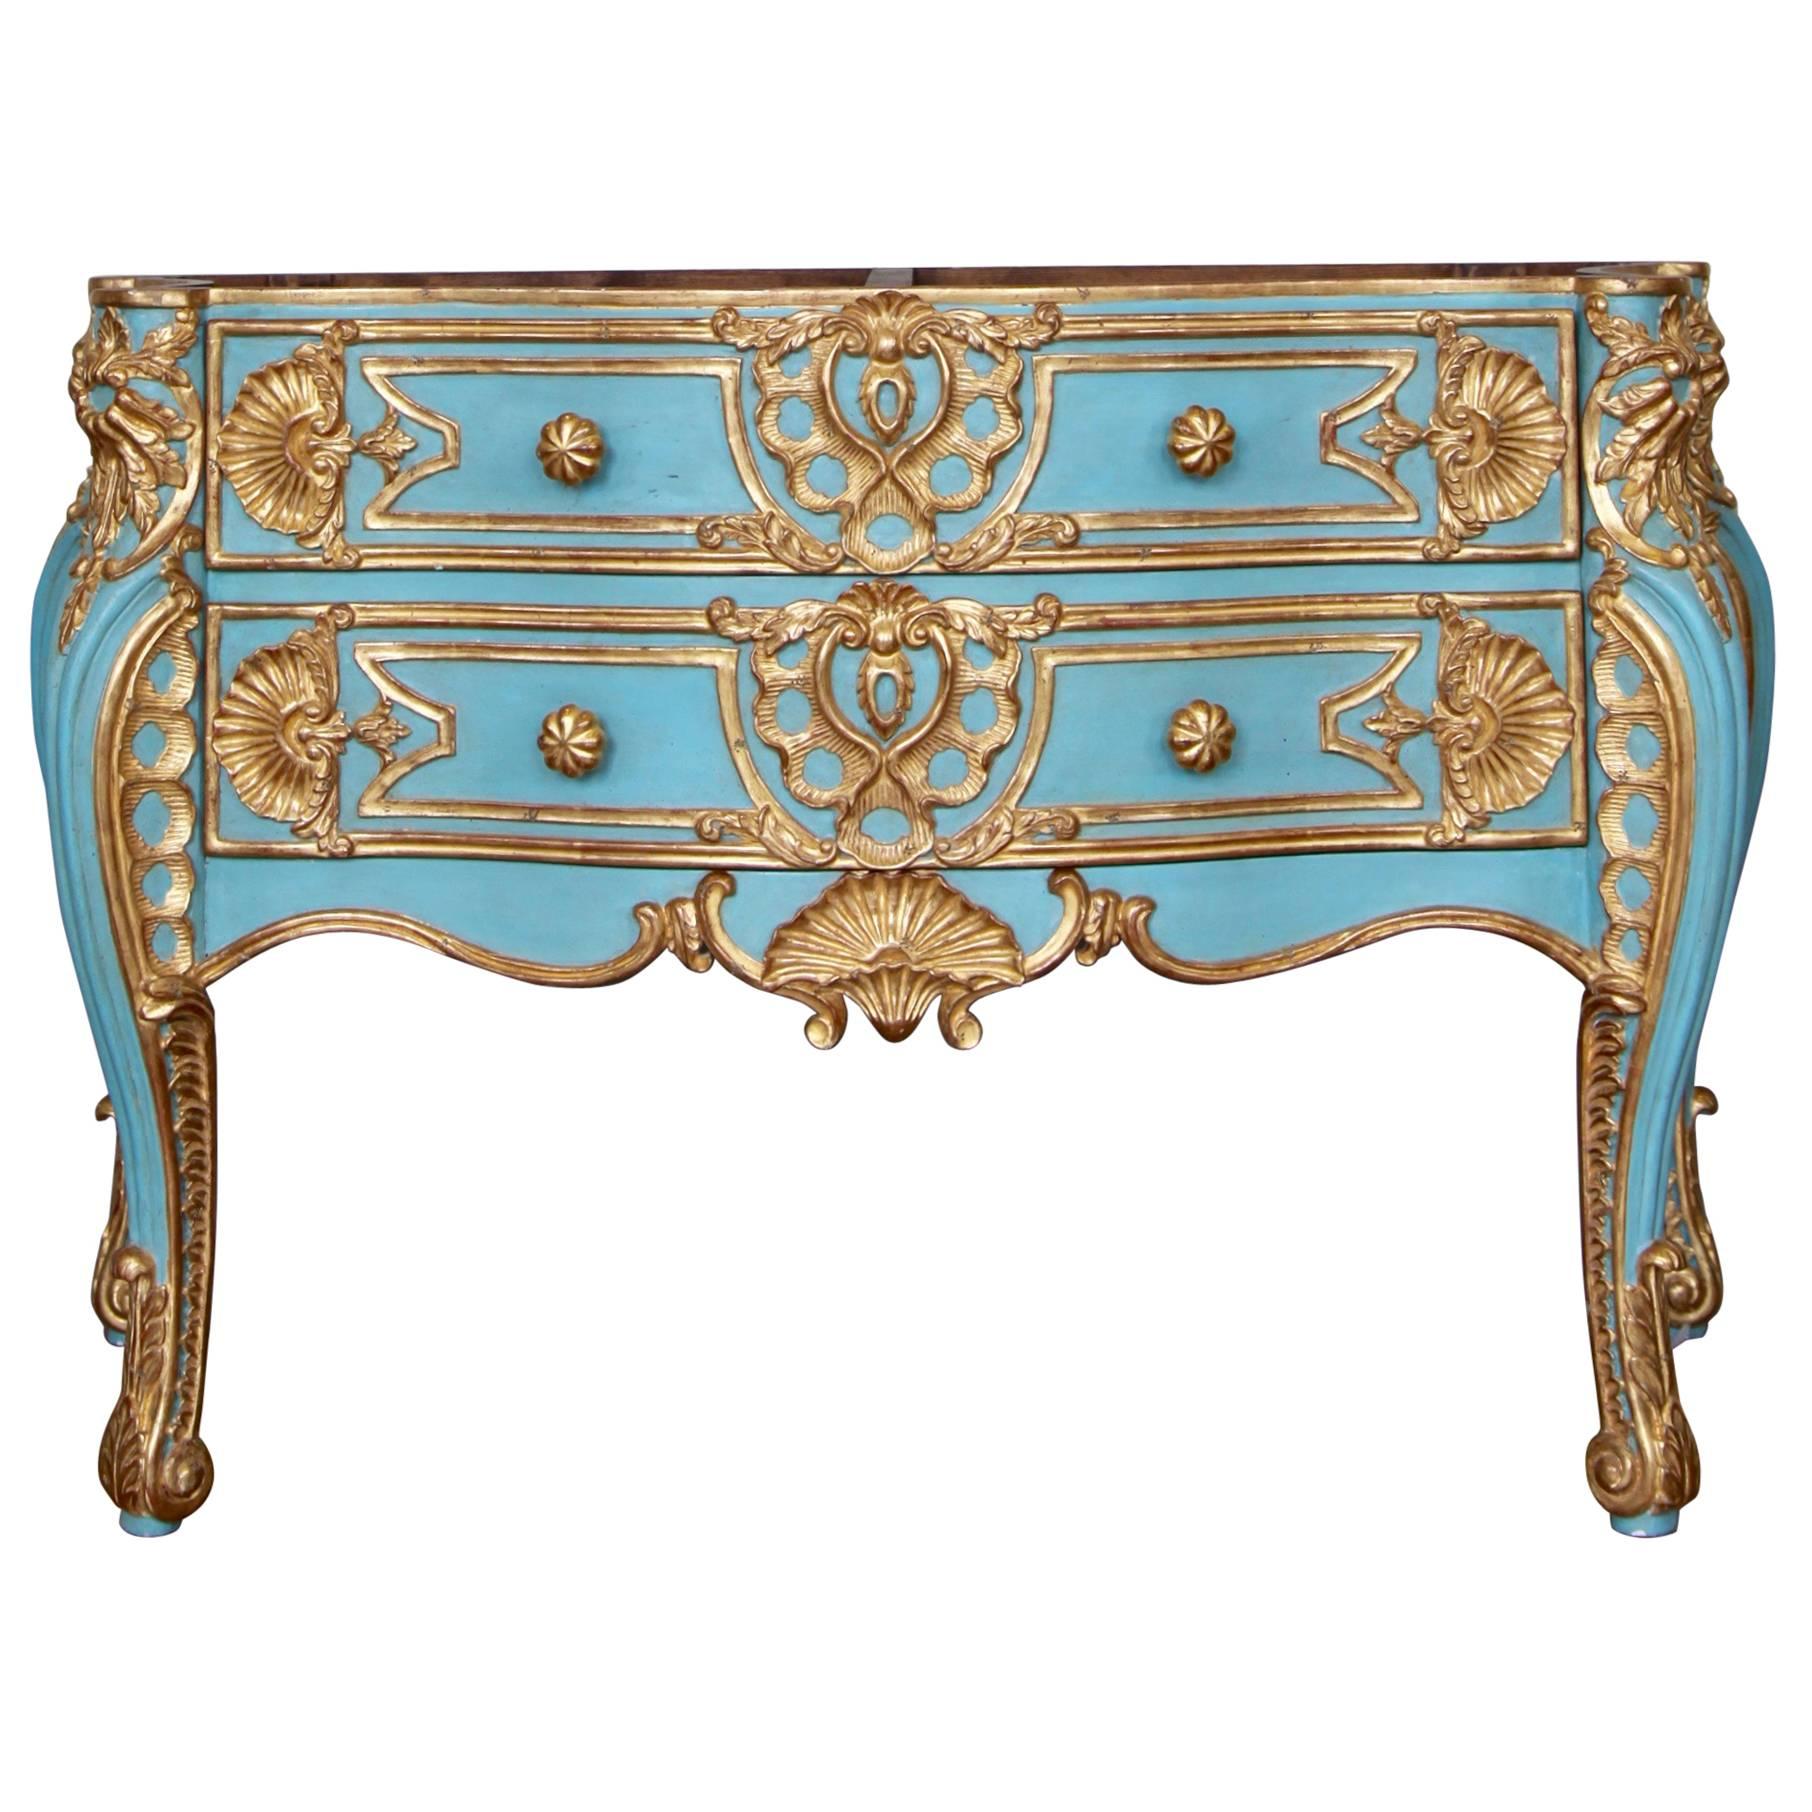 Italian Baroque Style Giltwood Commode Reproduced by La Maison, London